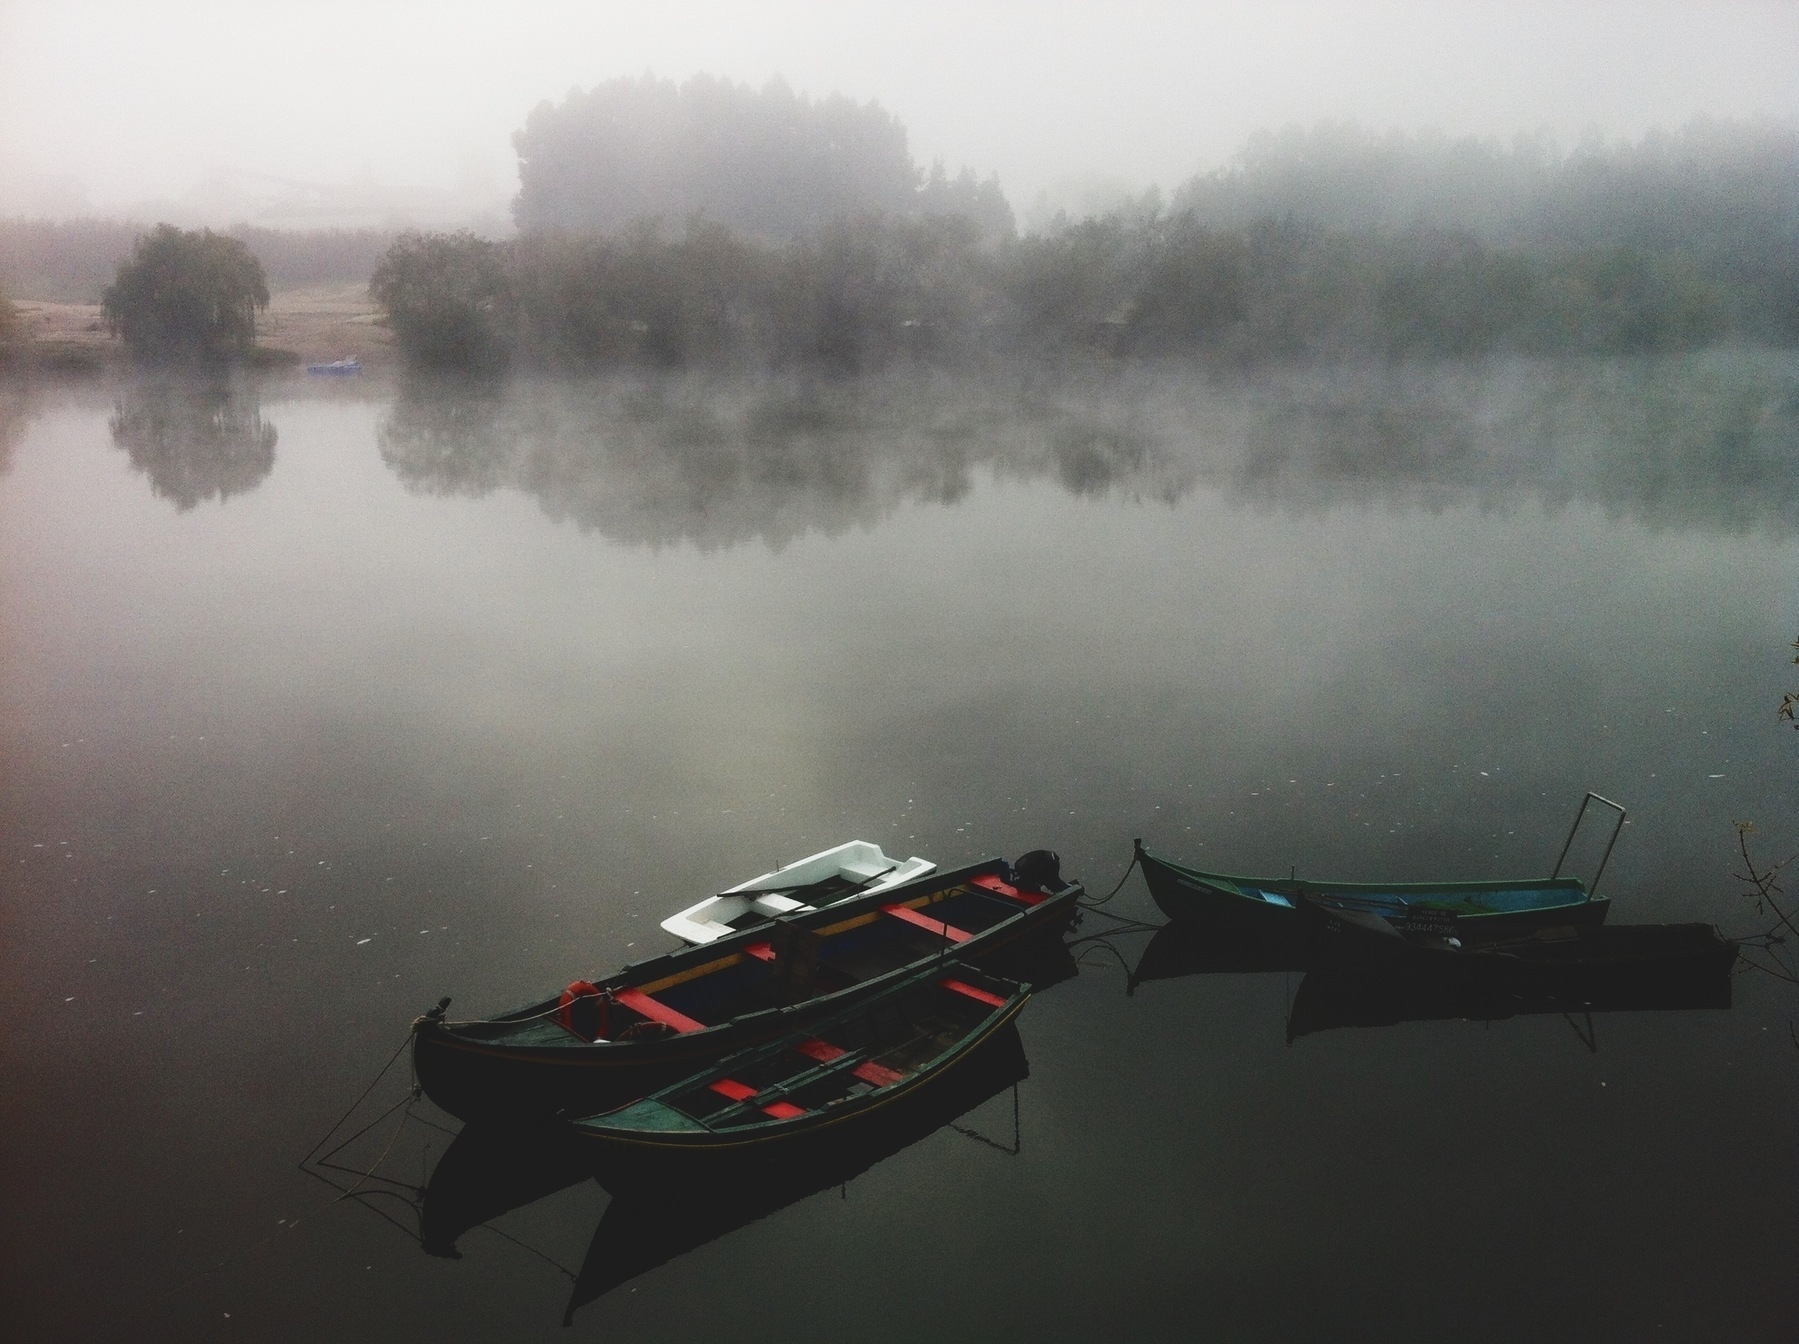 Boats rest on a very still river, with fog on the background.